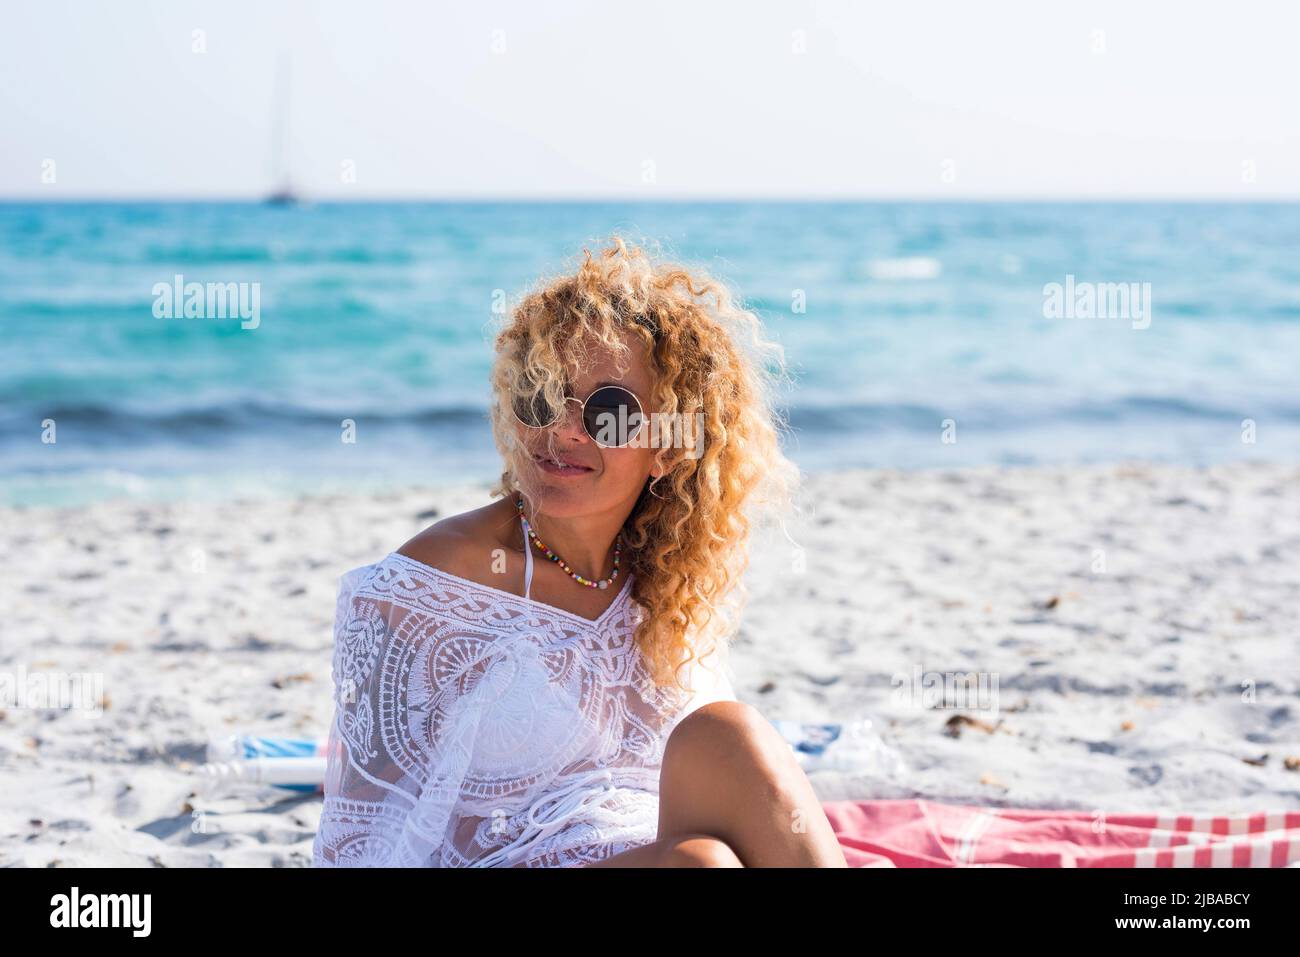 Cheerful female tourist smile and enjoy summer holiday vacation sitting and relaxing at the beach with blue sea water in background. Tropical sand and Stock Photo